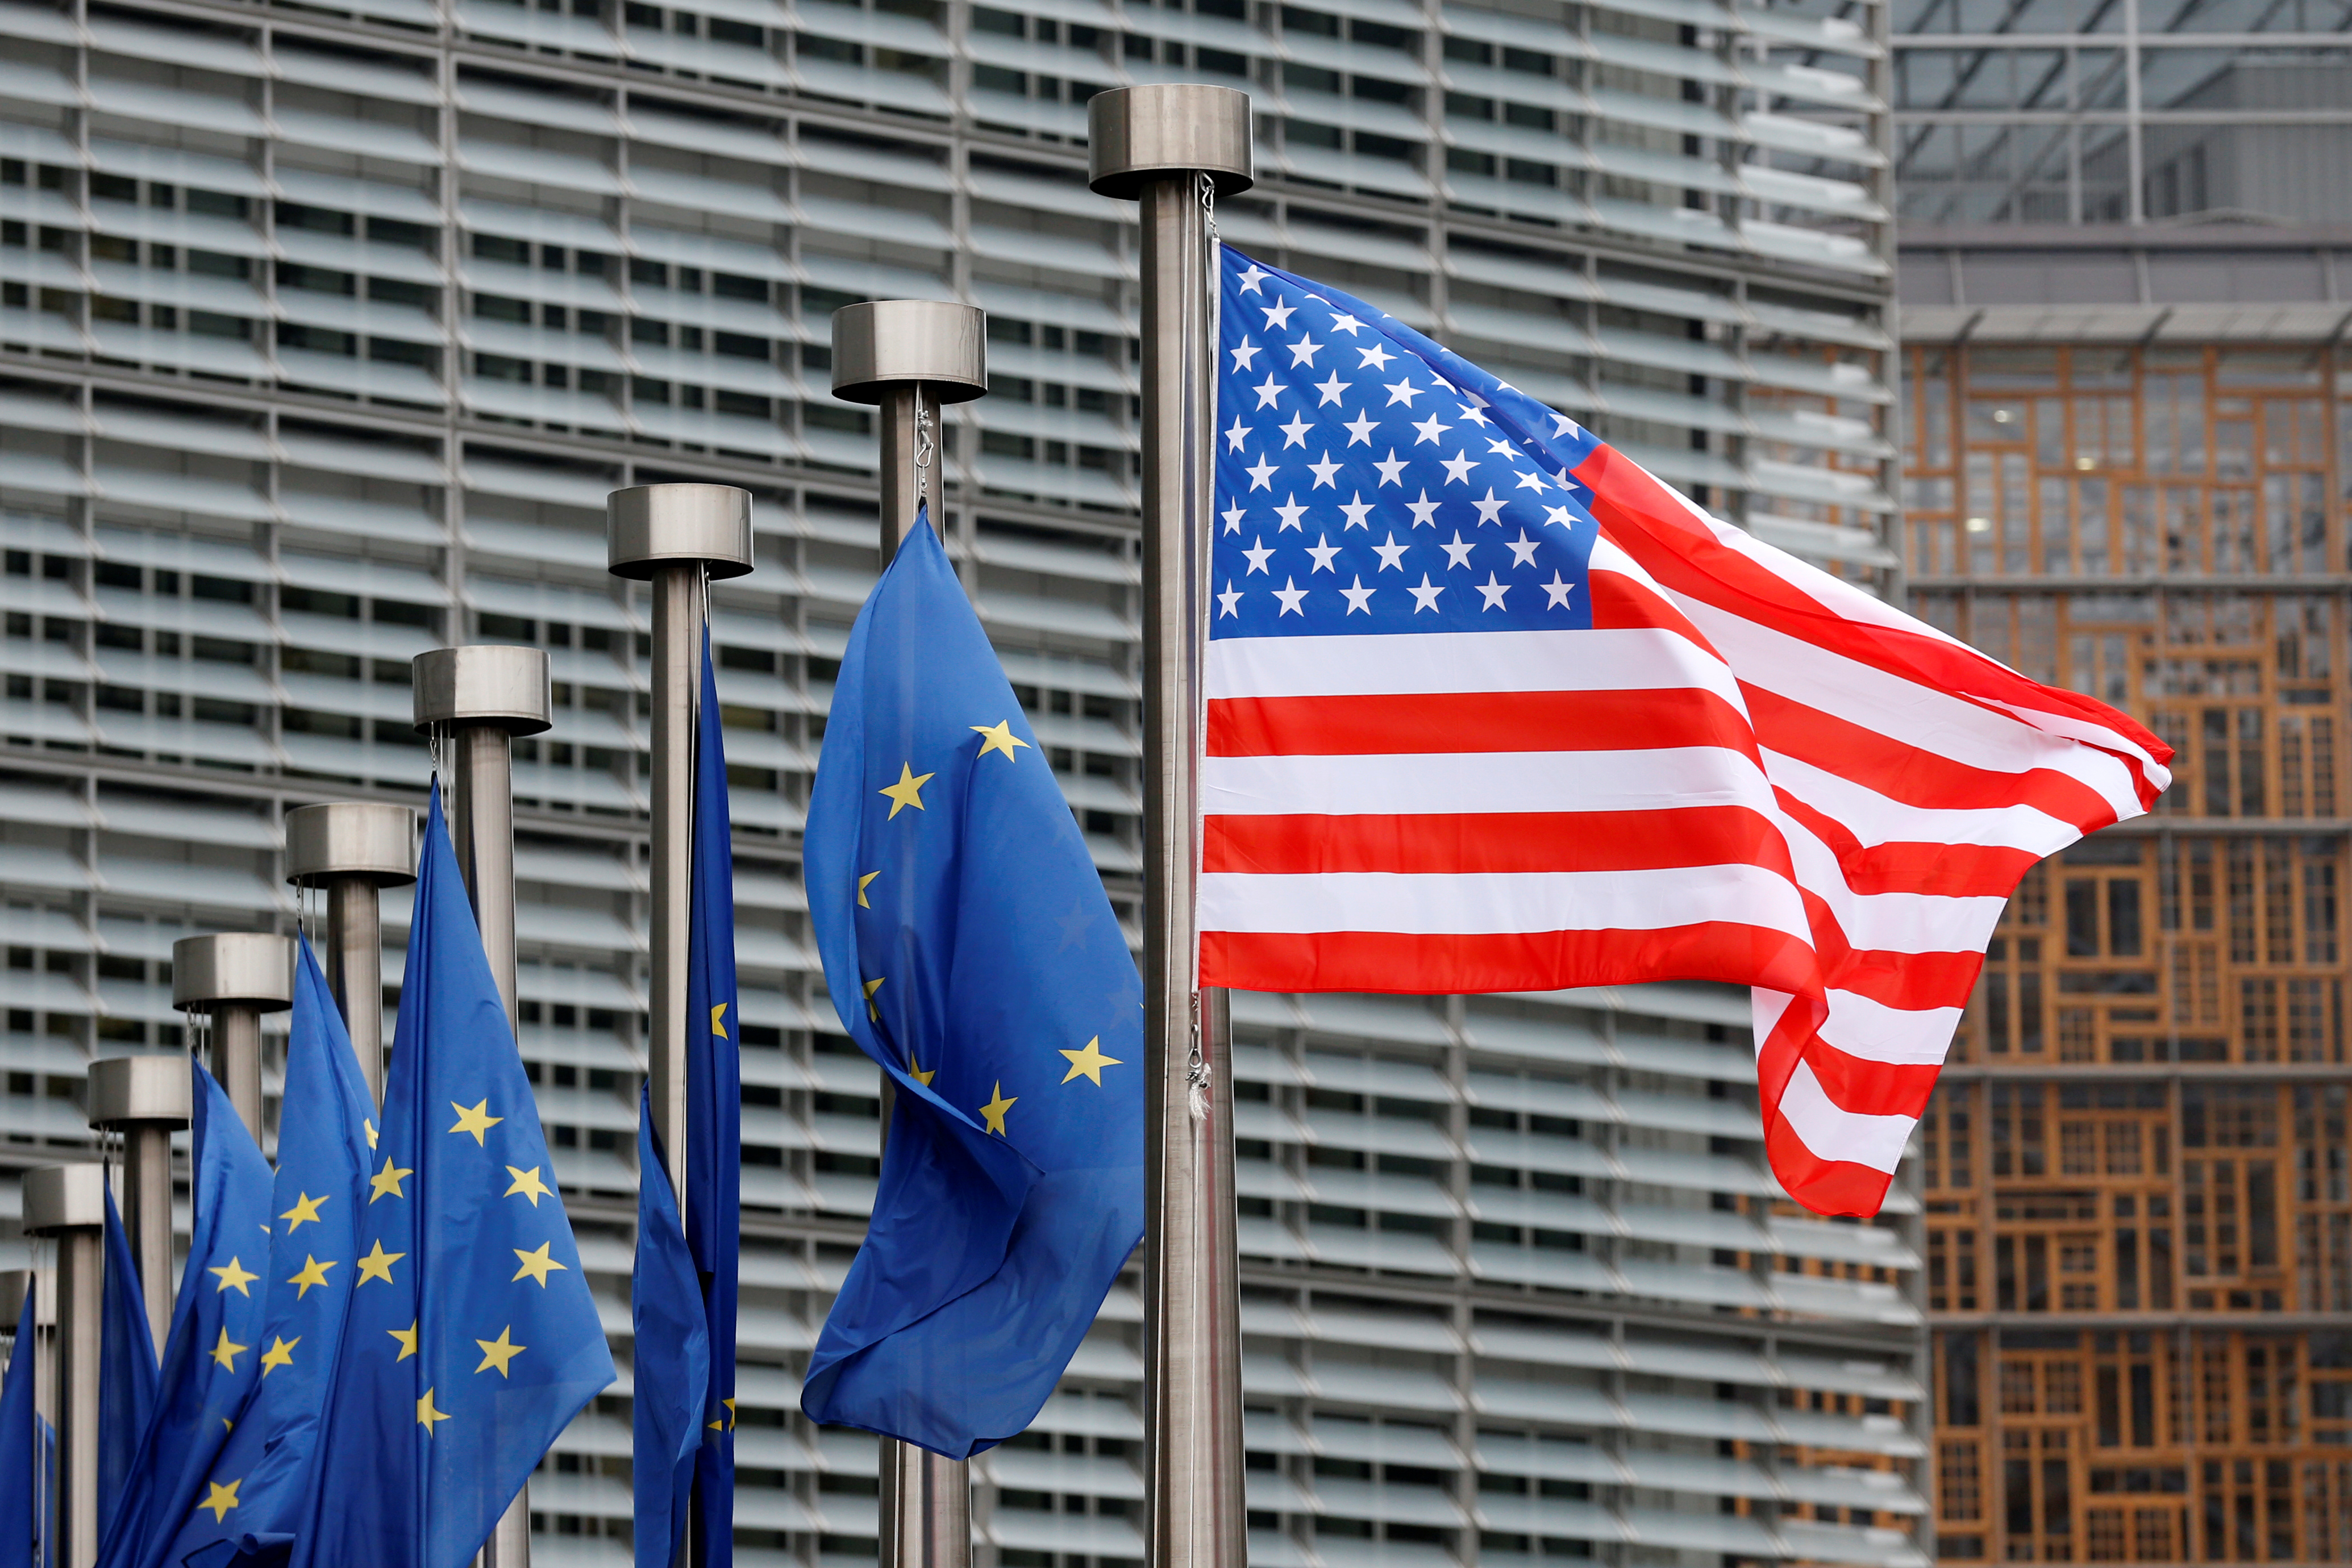 U.S. and EU flags are pictured during the visit of Vice President Pence to the European Commission headquarters in Brussels